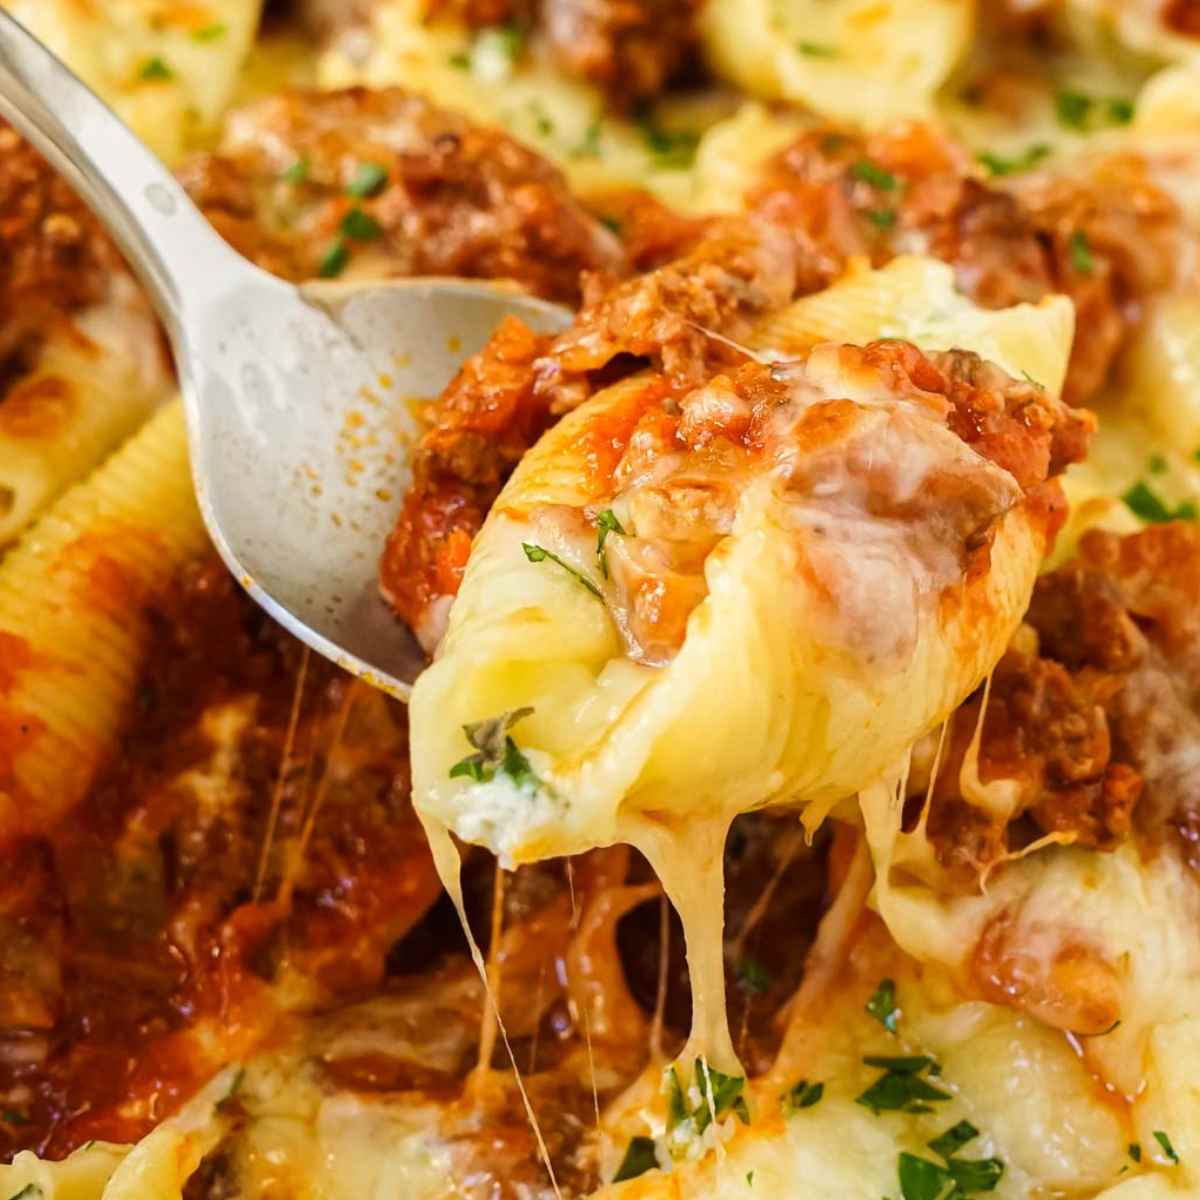 Cheesy stuffed shells with beef on a spoon.